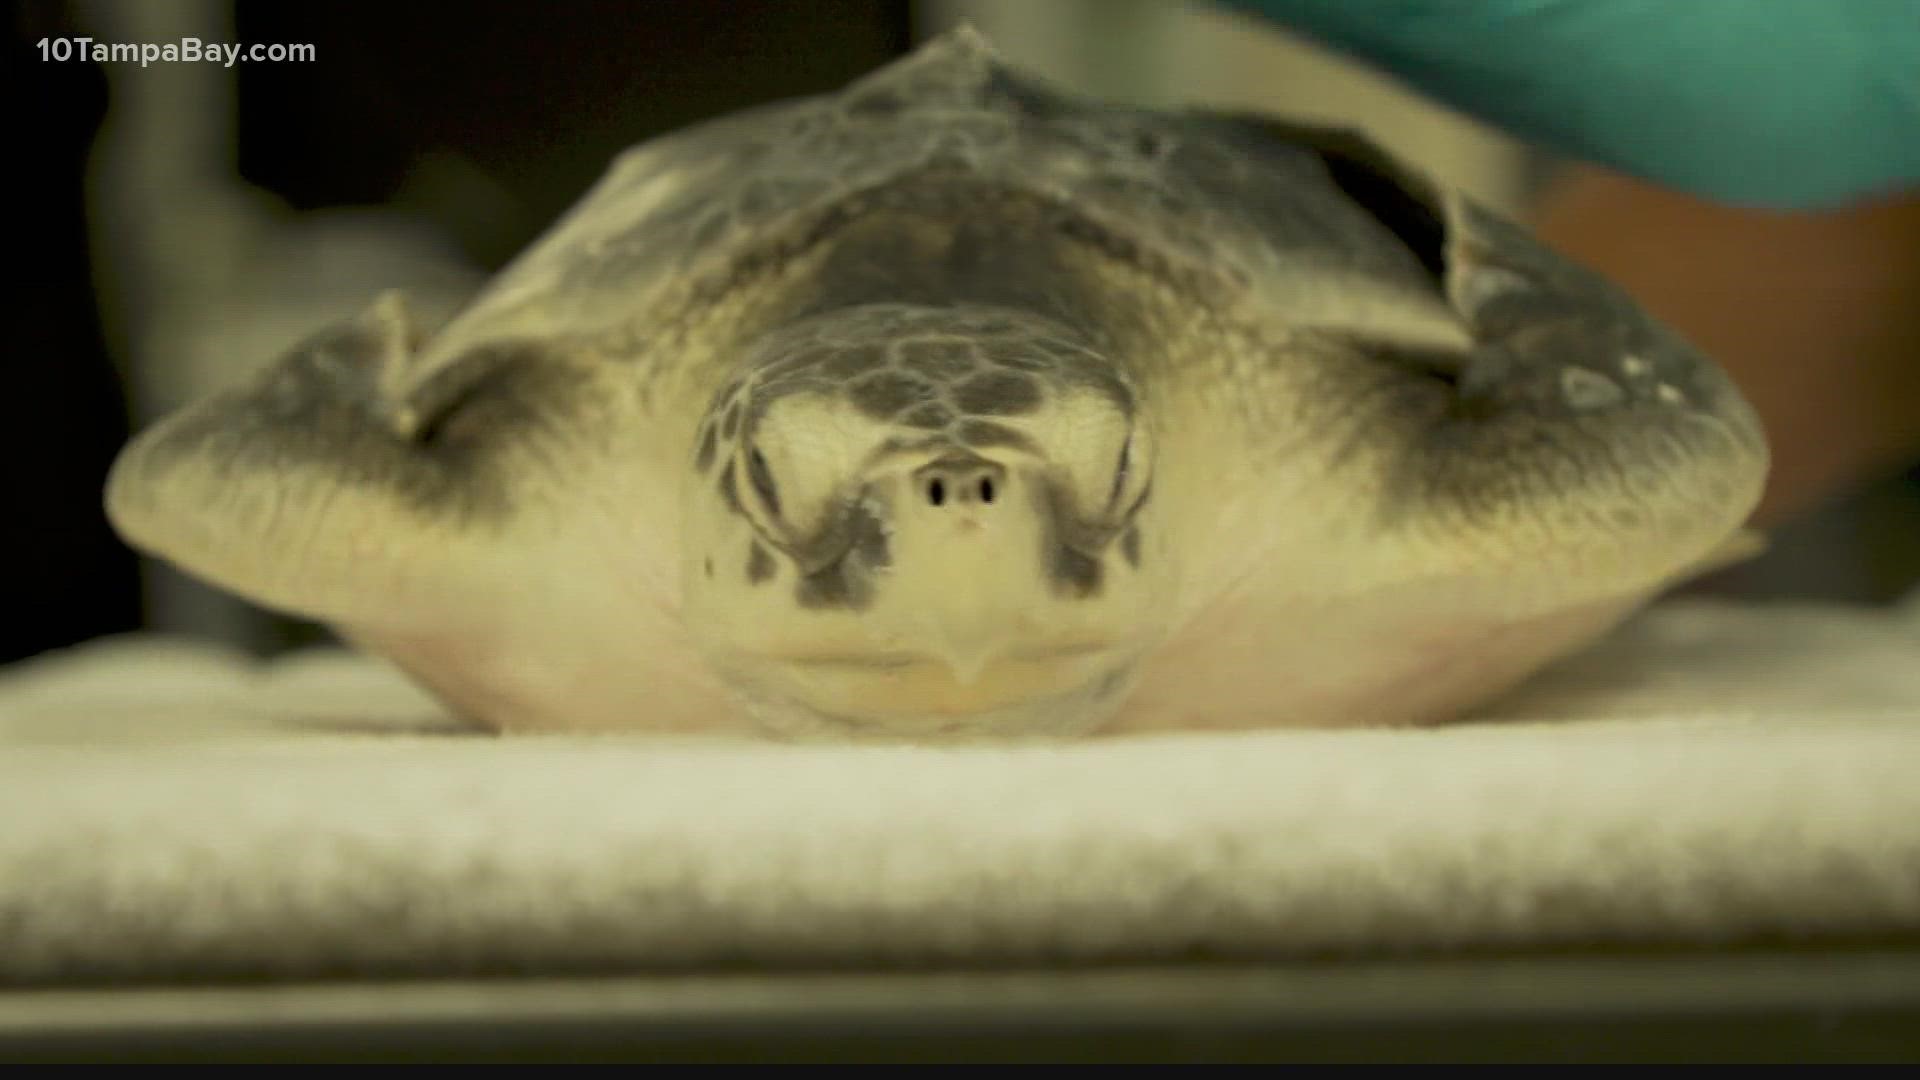 Experts say red tide exposure can confuse sea turtles so much that they drown.